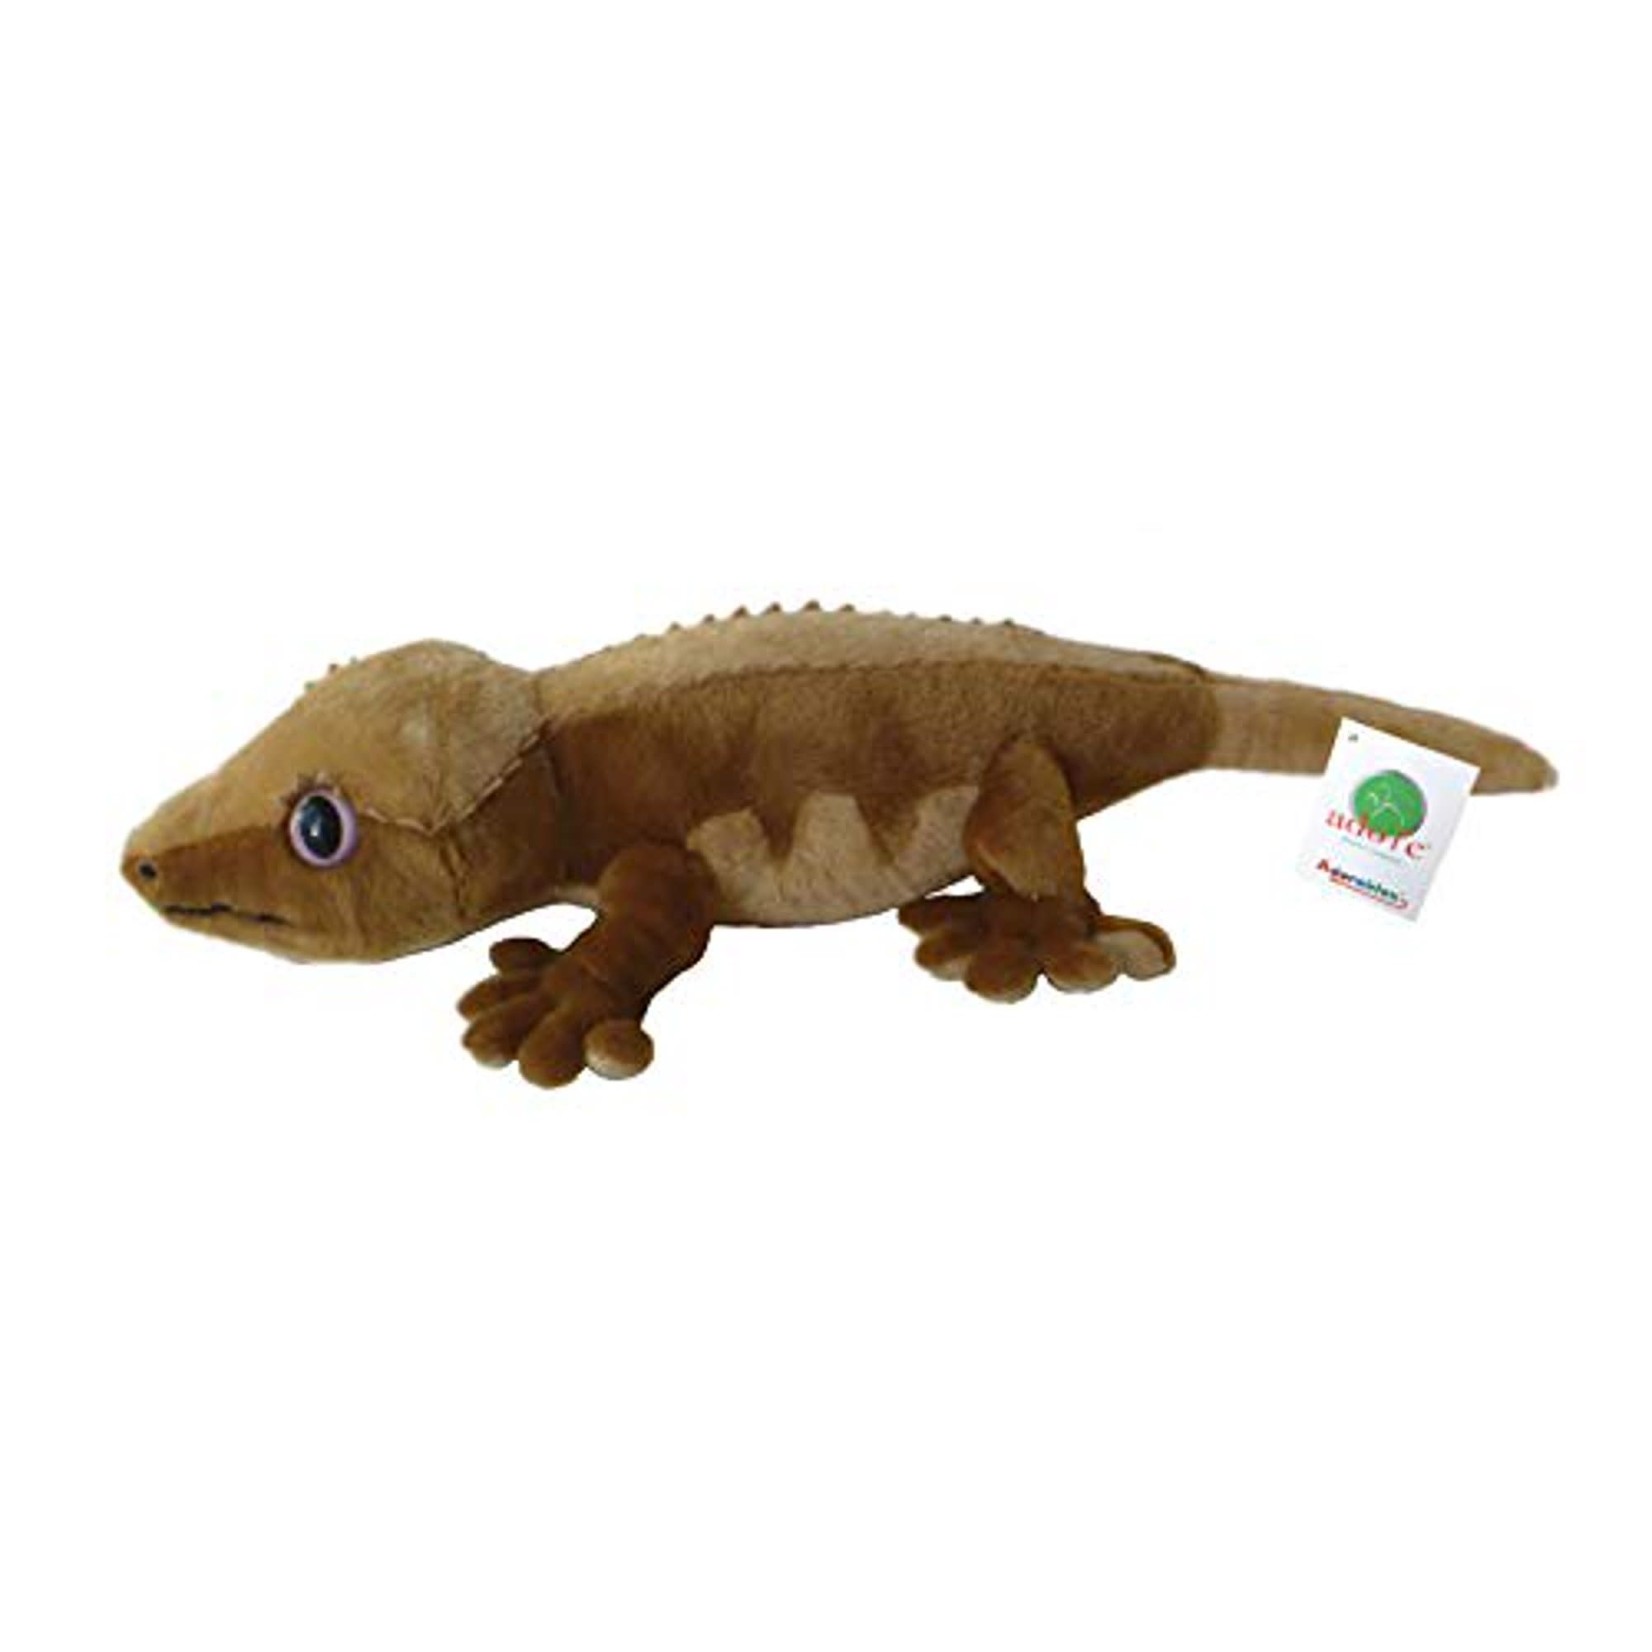 ADORE Lashes the Crested Gecko Stuffed Toy Plushie 20"